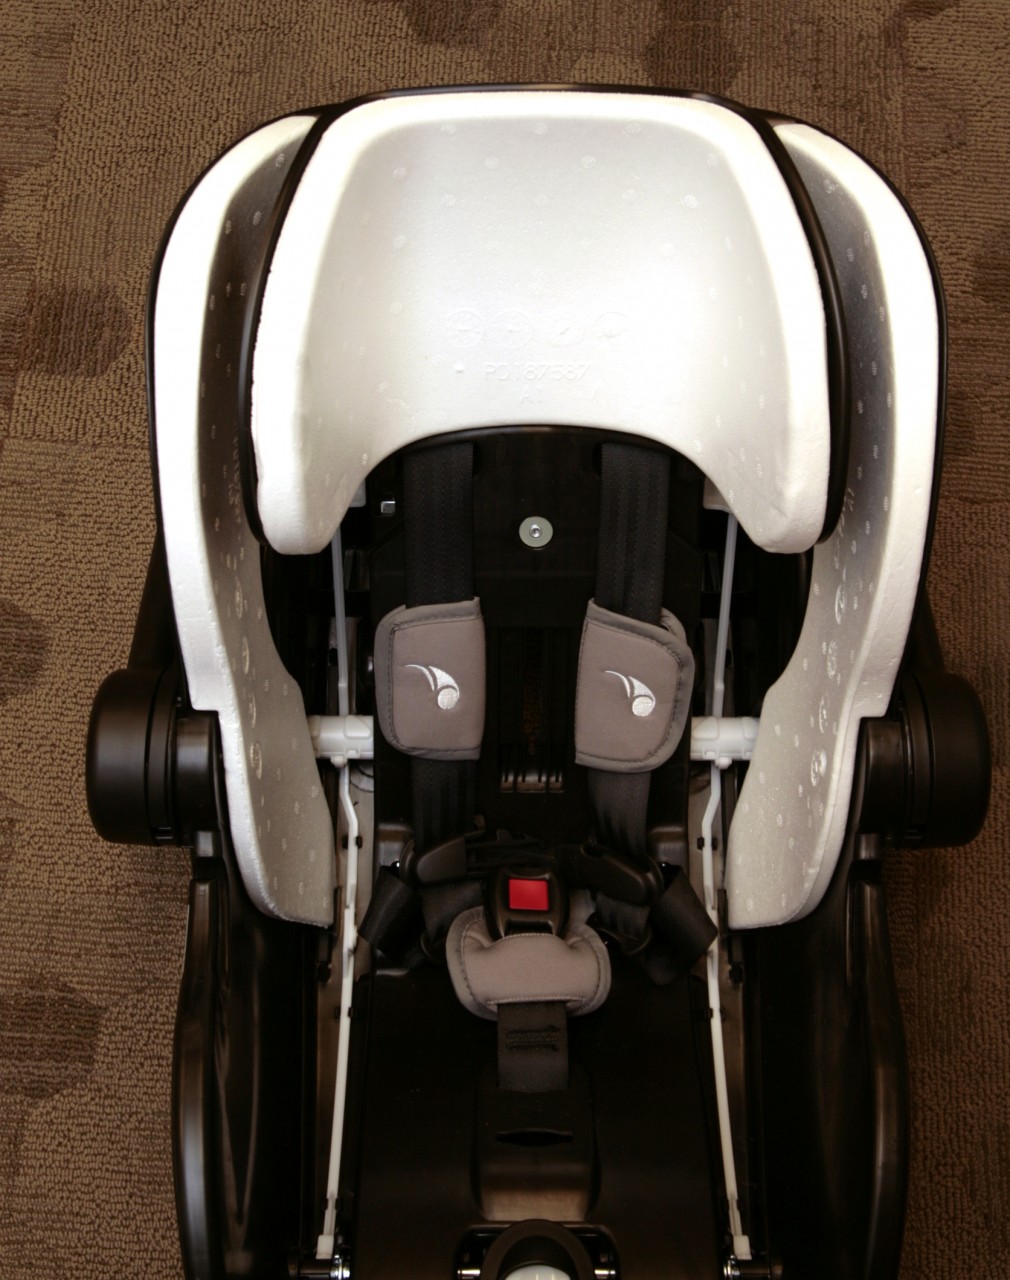 Travel System Review: Baby Jogger City GO Infant Car Seat and City